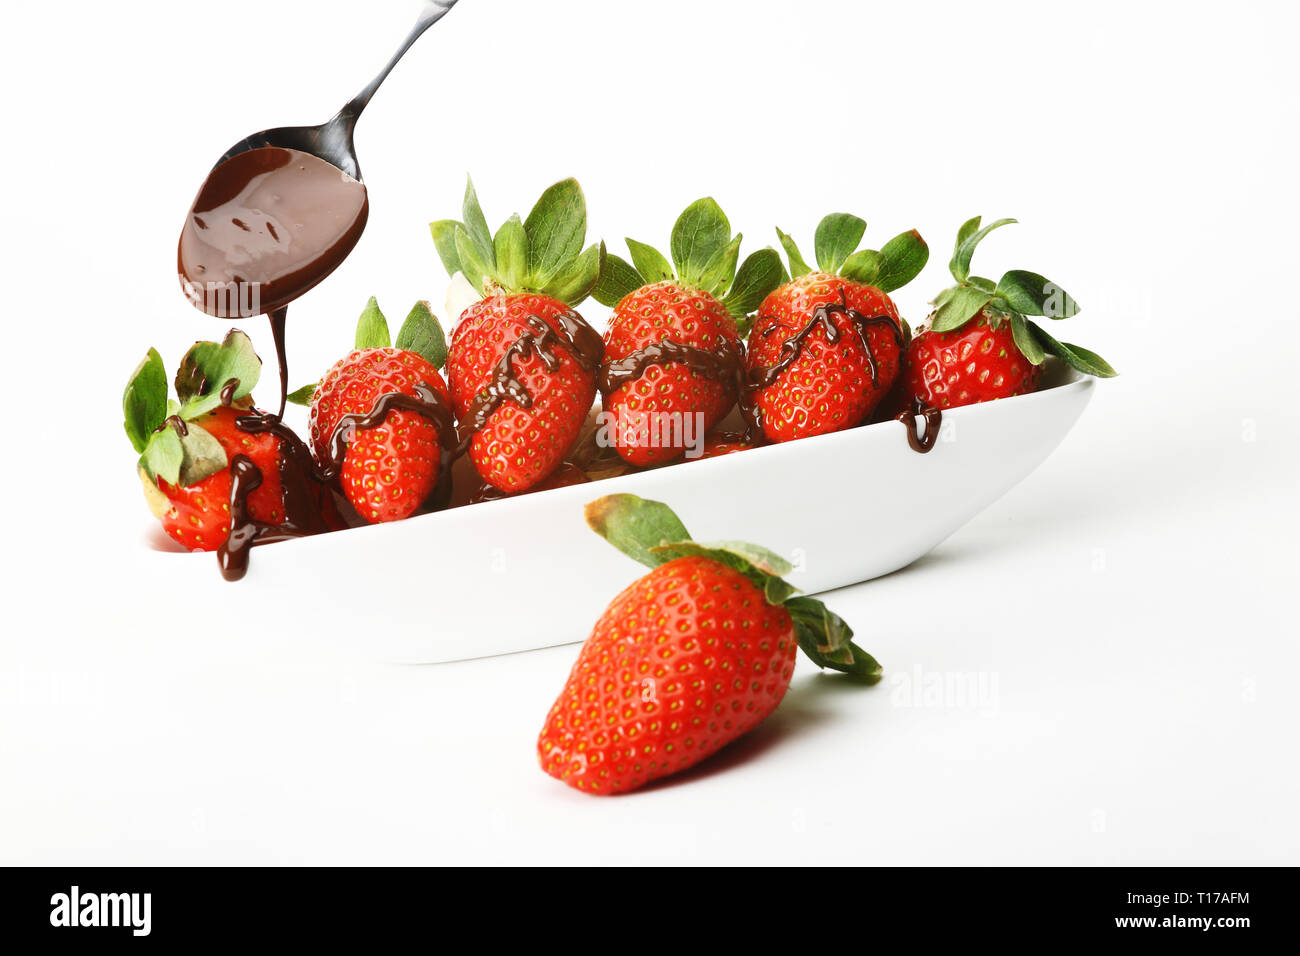 A bowl of strawberries covered with chocolate. Isolated against a white background. Stock Photo